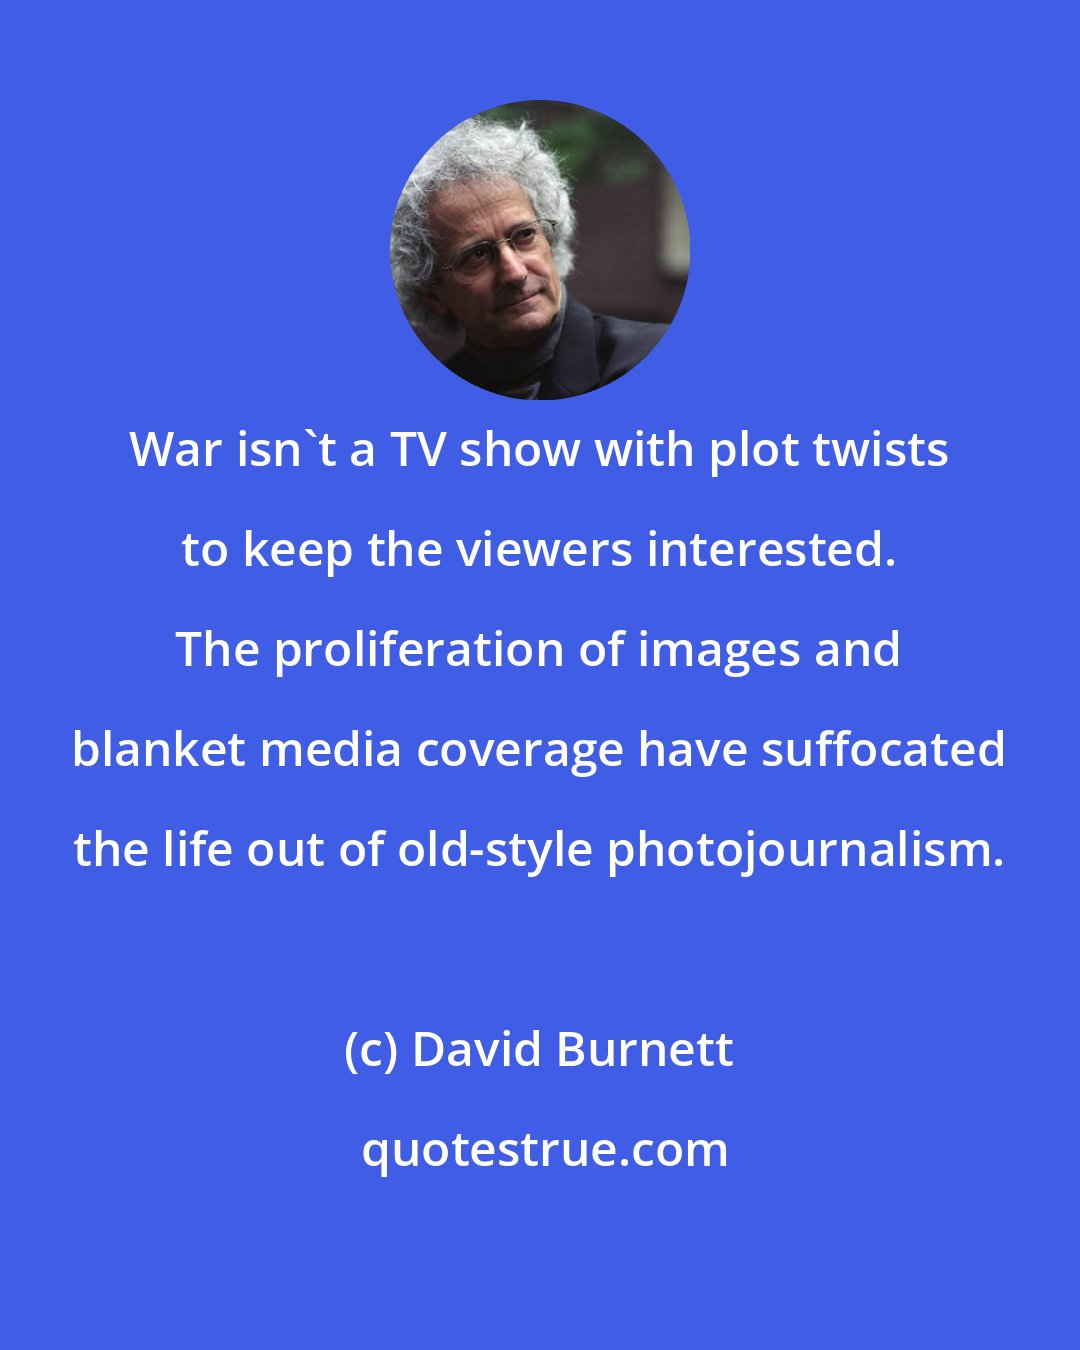 David Burnett: War isn't a TV show with plot twists to keep the viewers interested. The proliferation of images and blanket media coverage have suffocated the life out of old-style photojournalism.